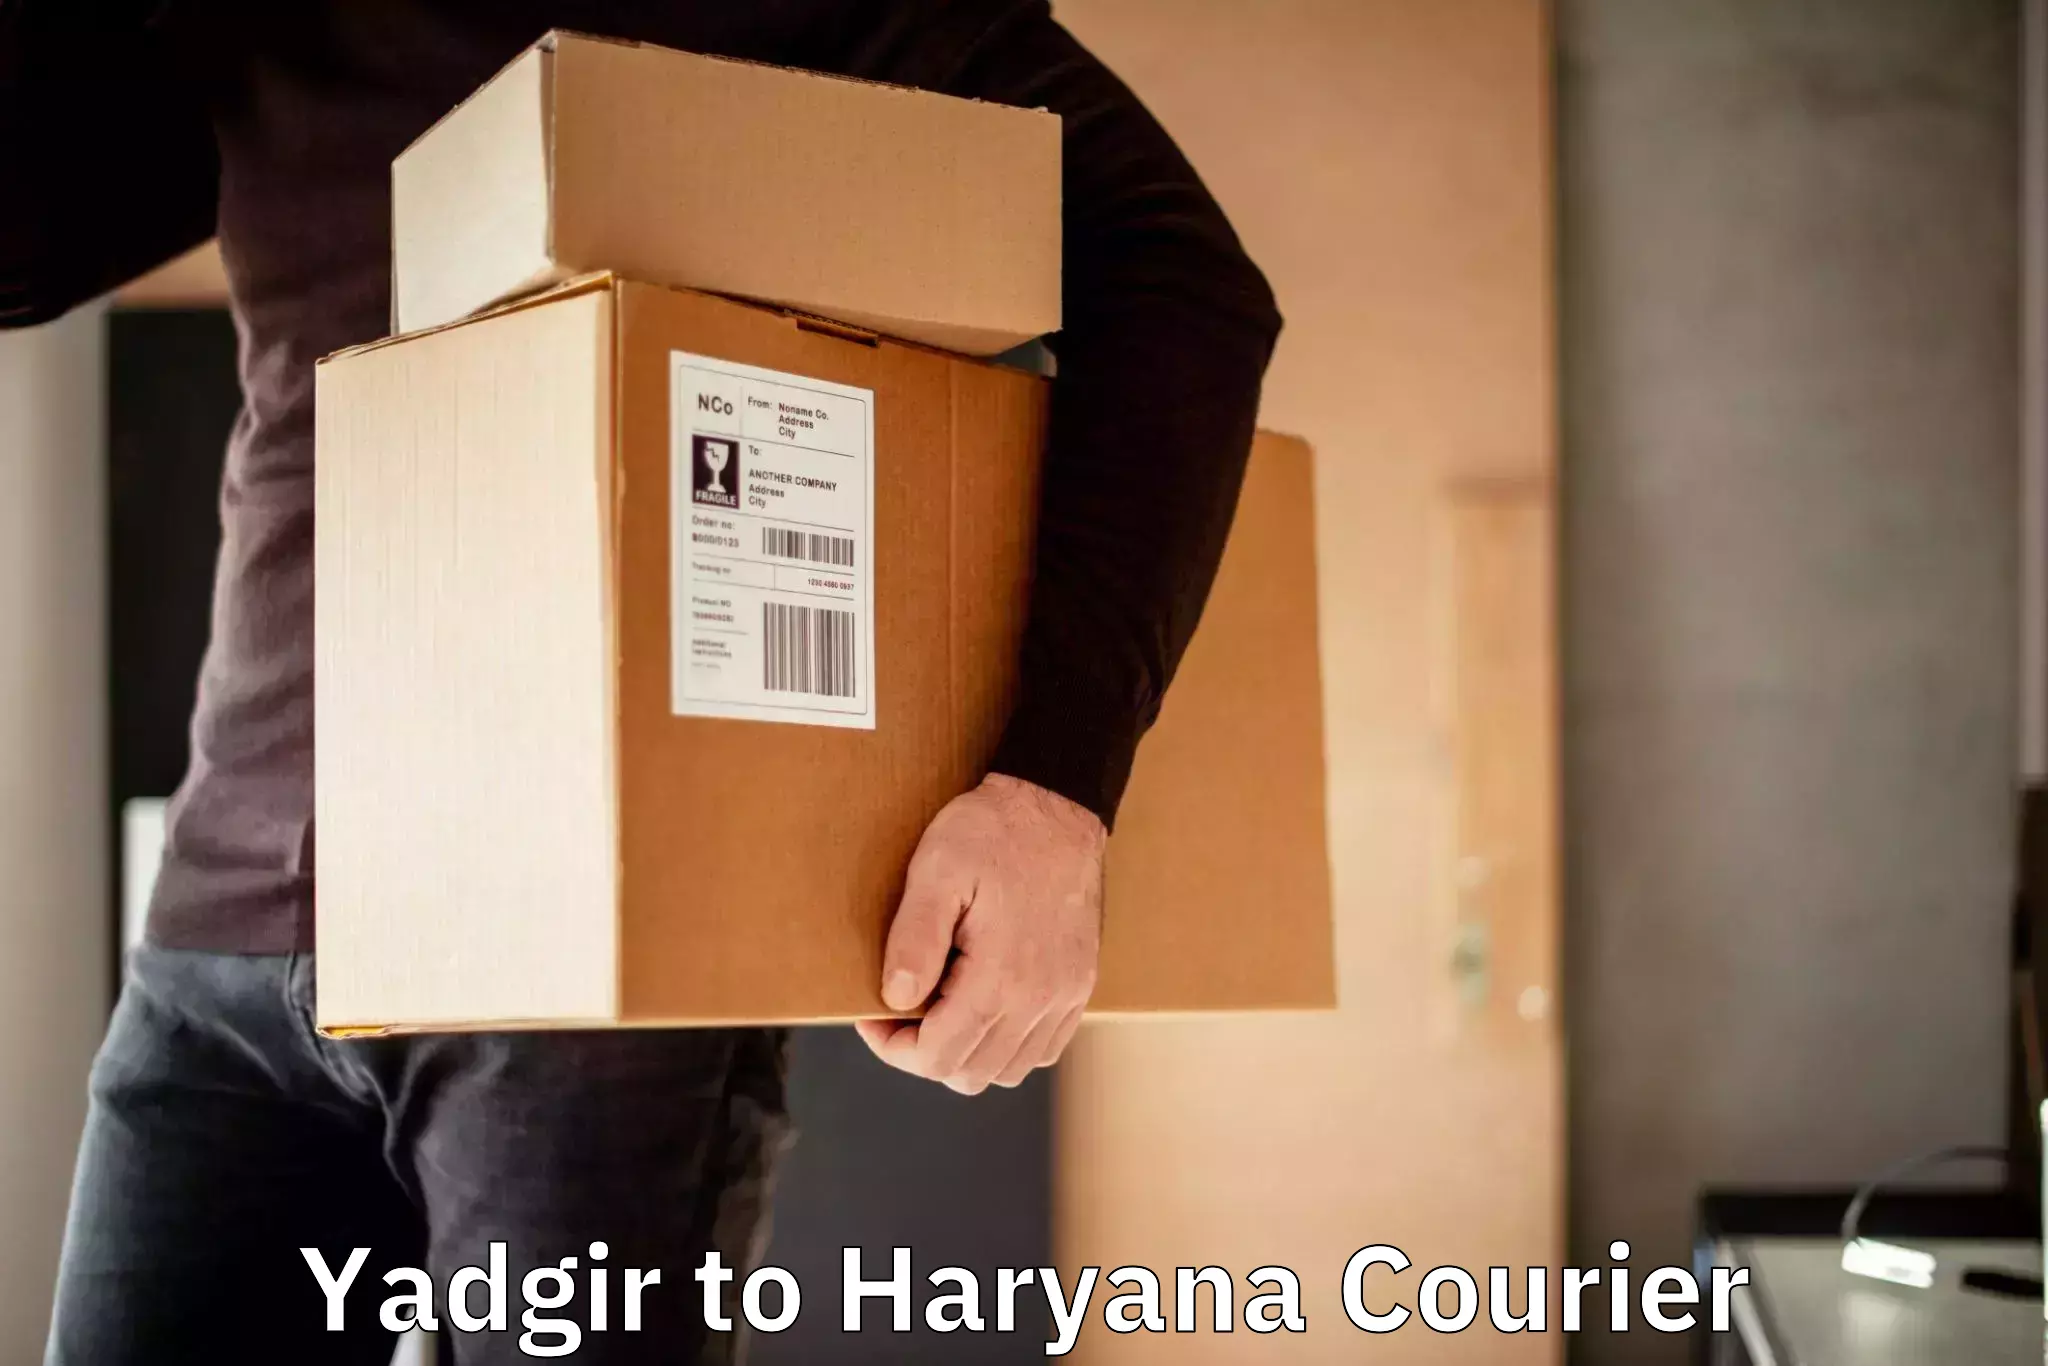 Online package tracking Yadgir to Chaudhary Charan Singh Haryana Agricultural University Hisar